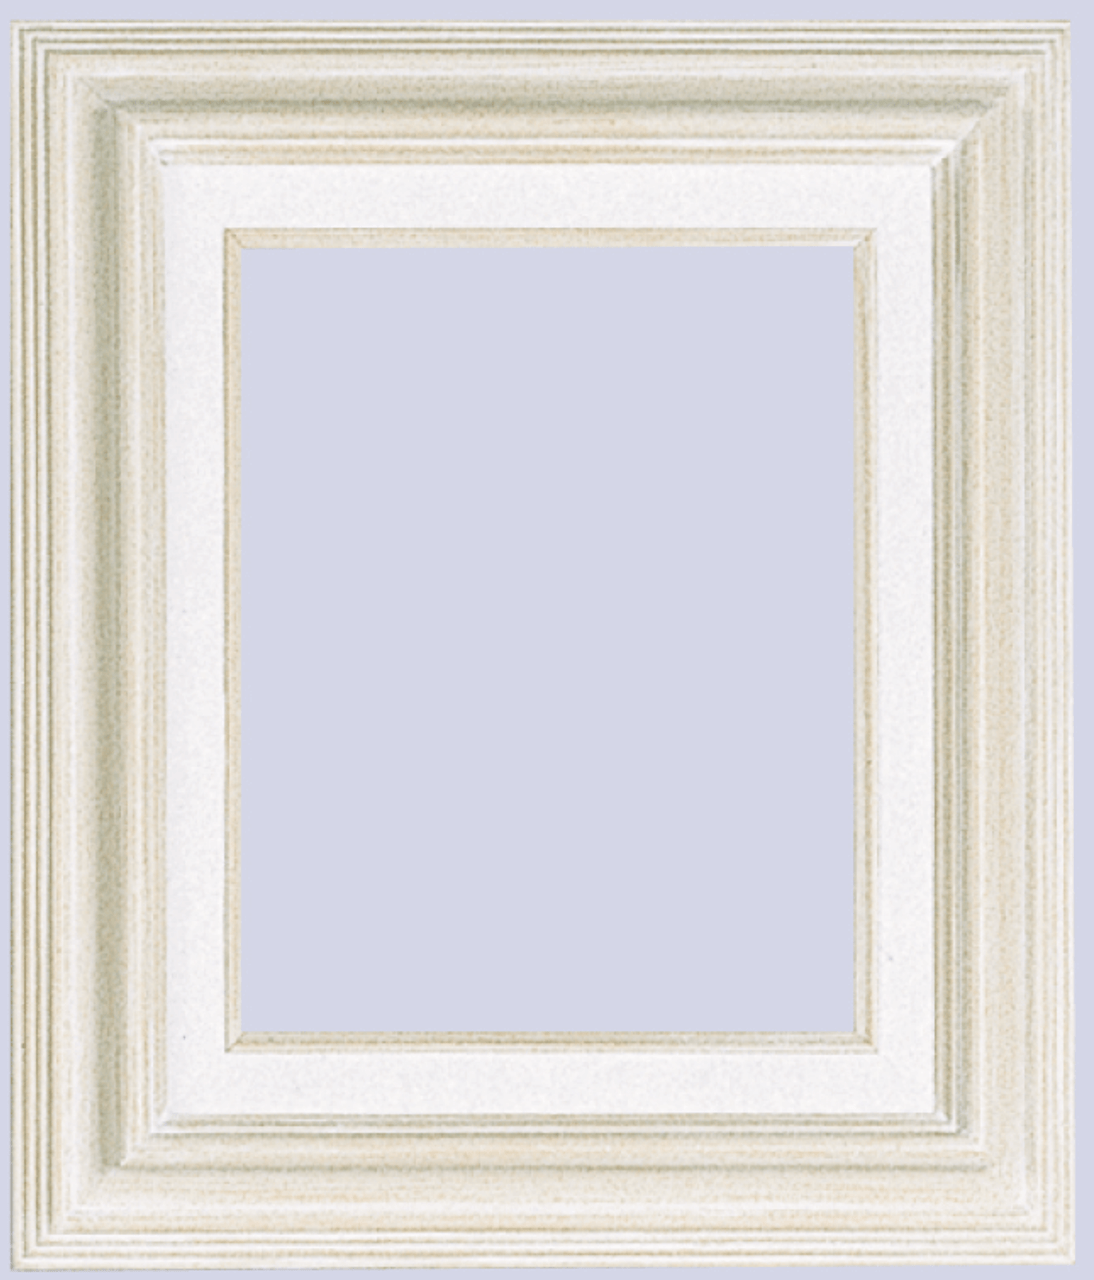 3 Inch Econo Wood Frames With Linen Liners: 20X27